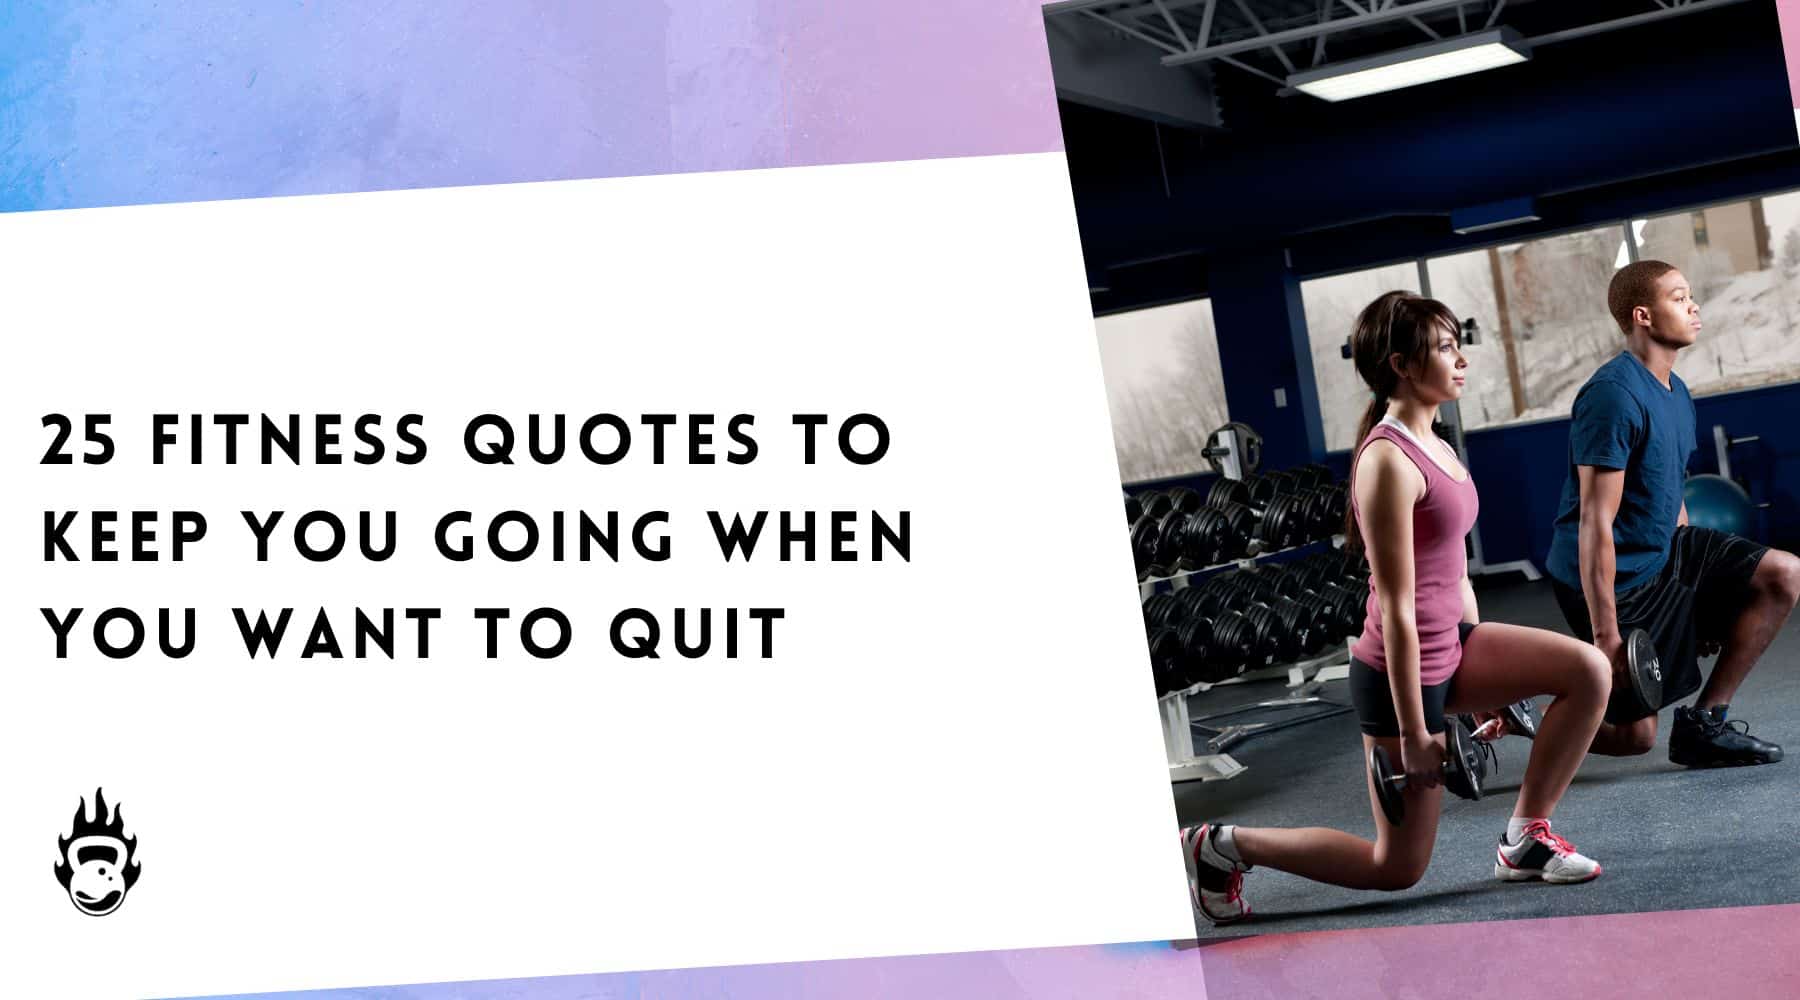 8 Motivational Health and Fitness Quotes